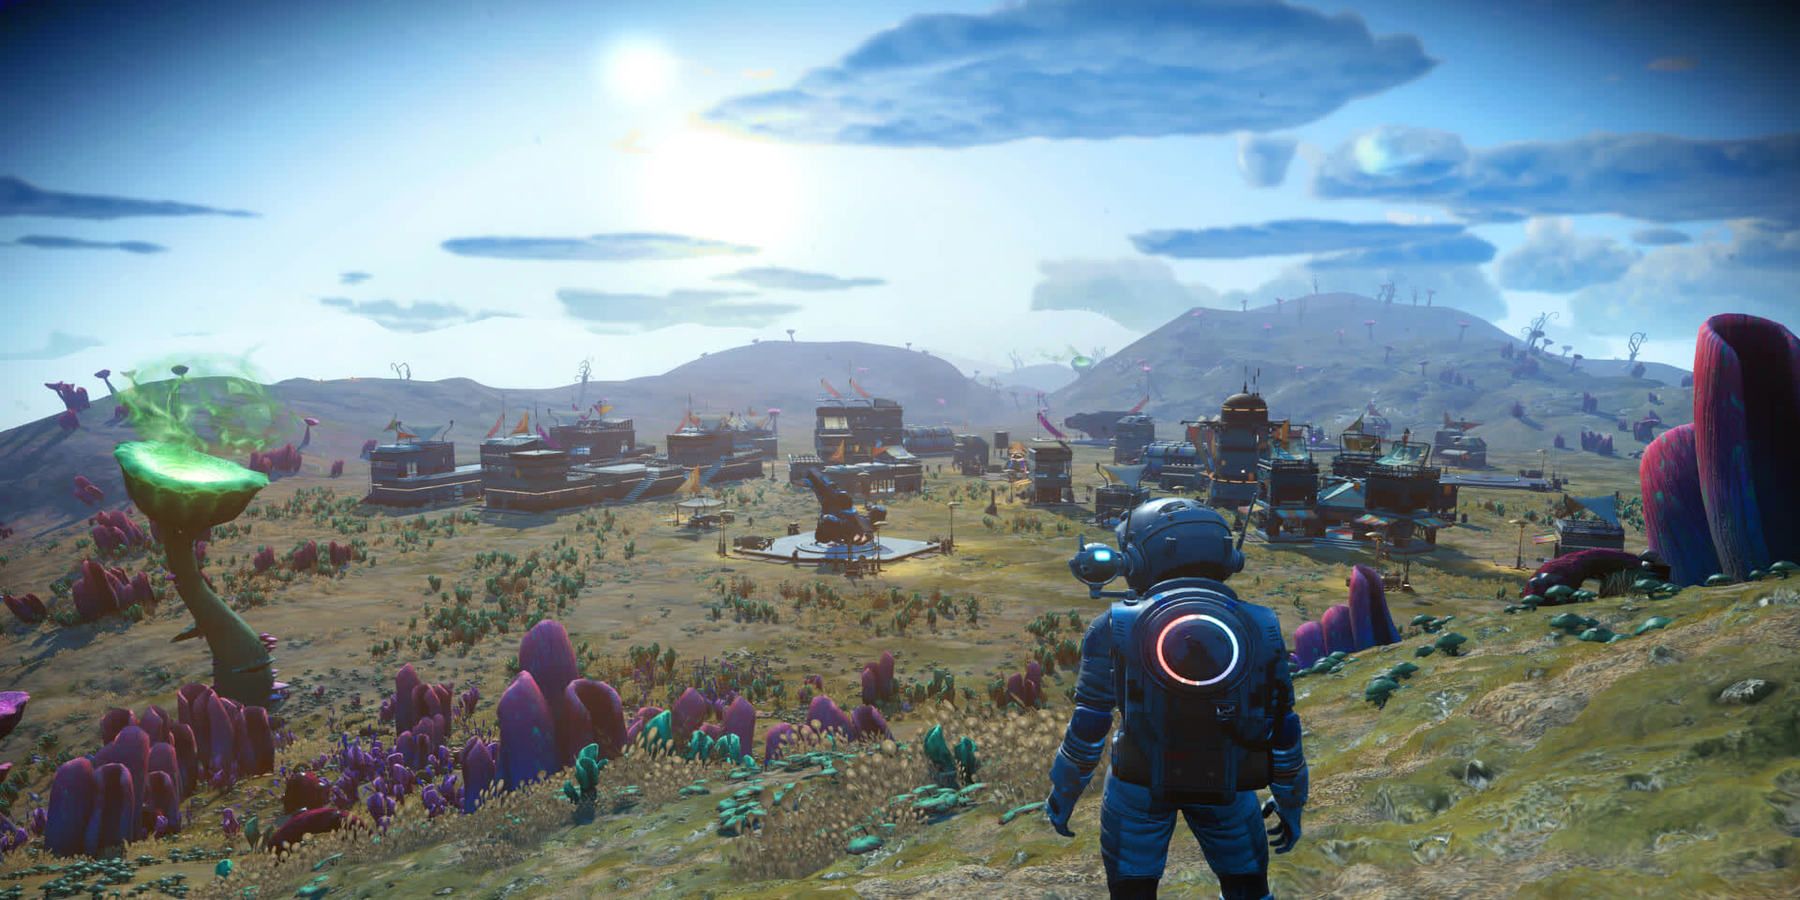 no-mans-sky-settlement-zommed-out-view